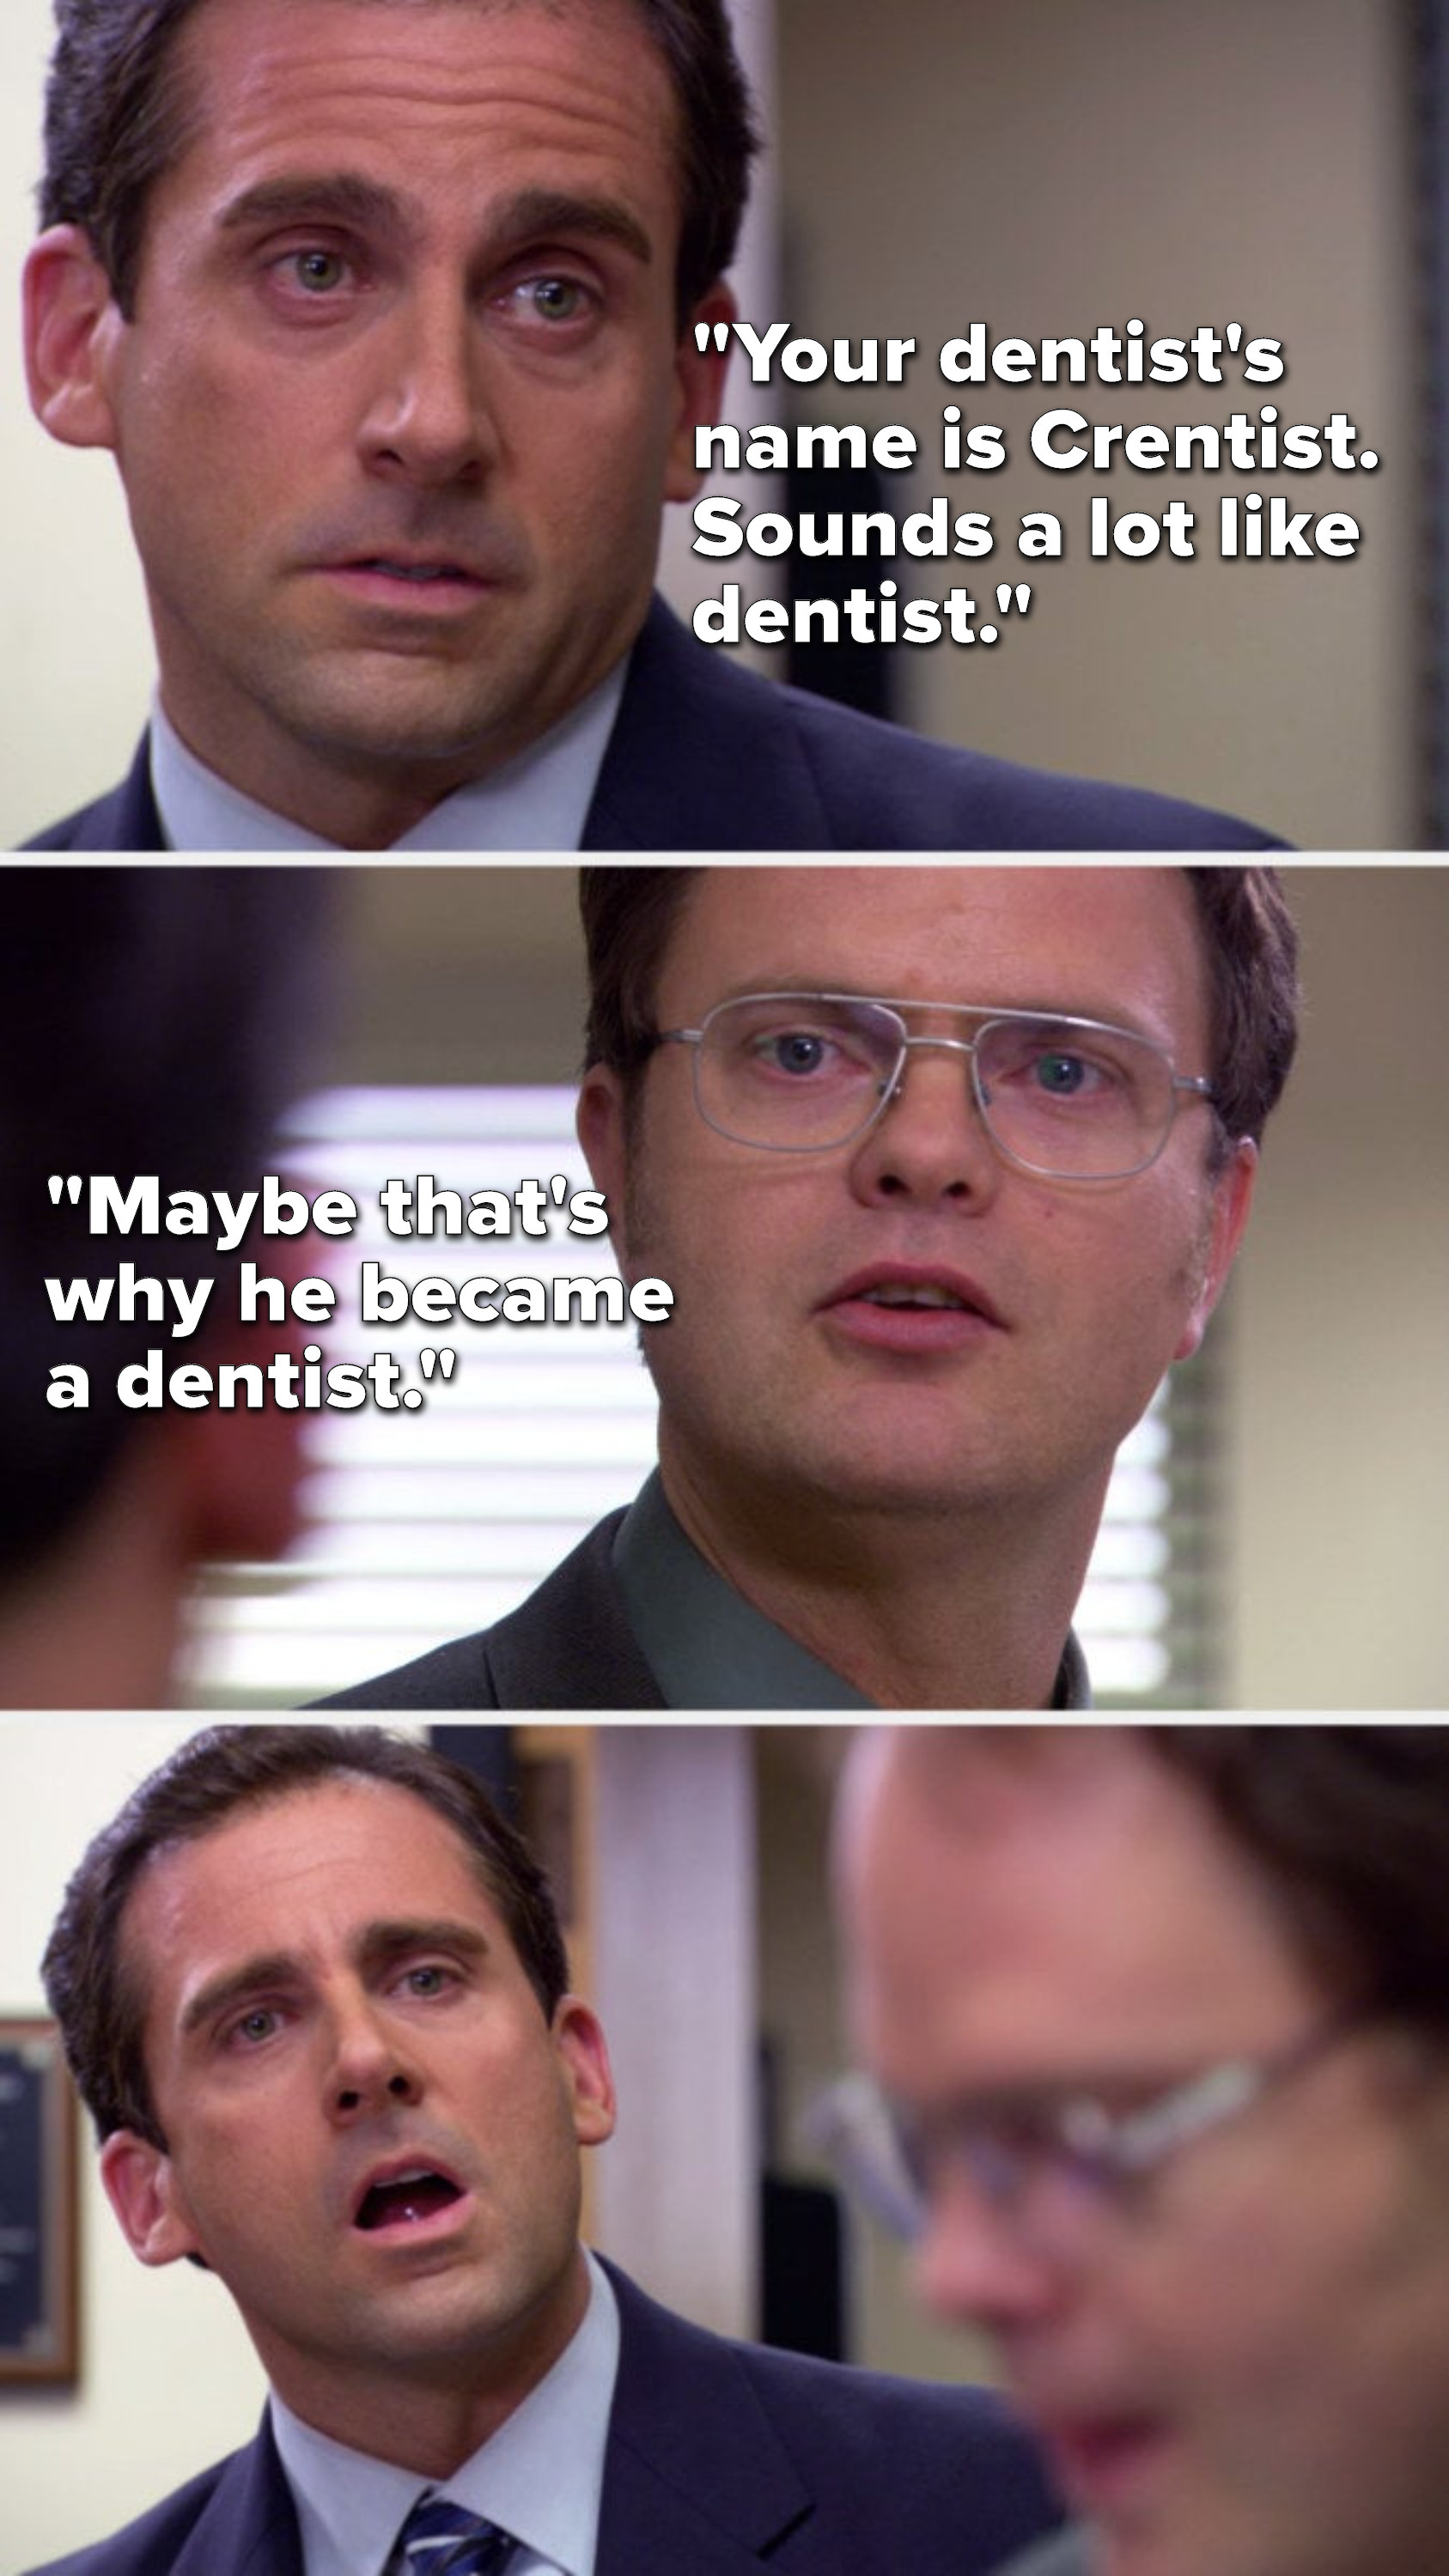 Michael says, &quot;Your dentist&#x27;s name is Crentist, sounds a lot like dentist,&quot; Dwight says, &quot;Maybe that&#x27;s why he became a dentist&quot; and Michael is clearly furious